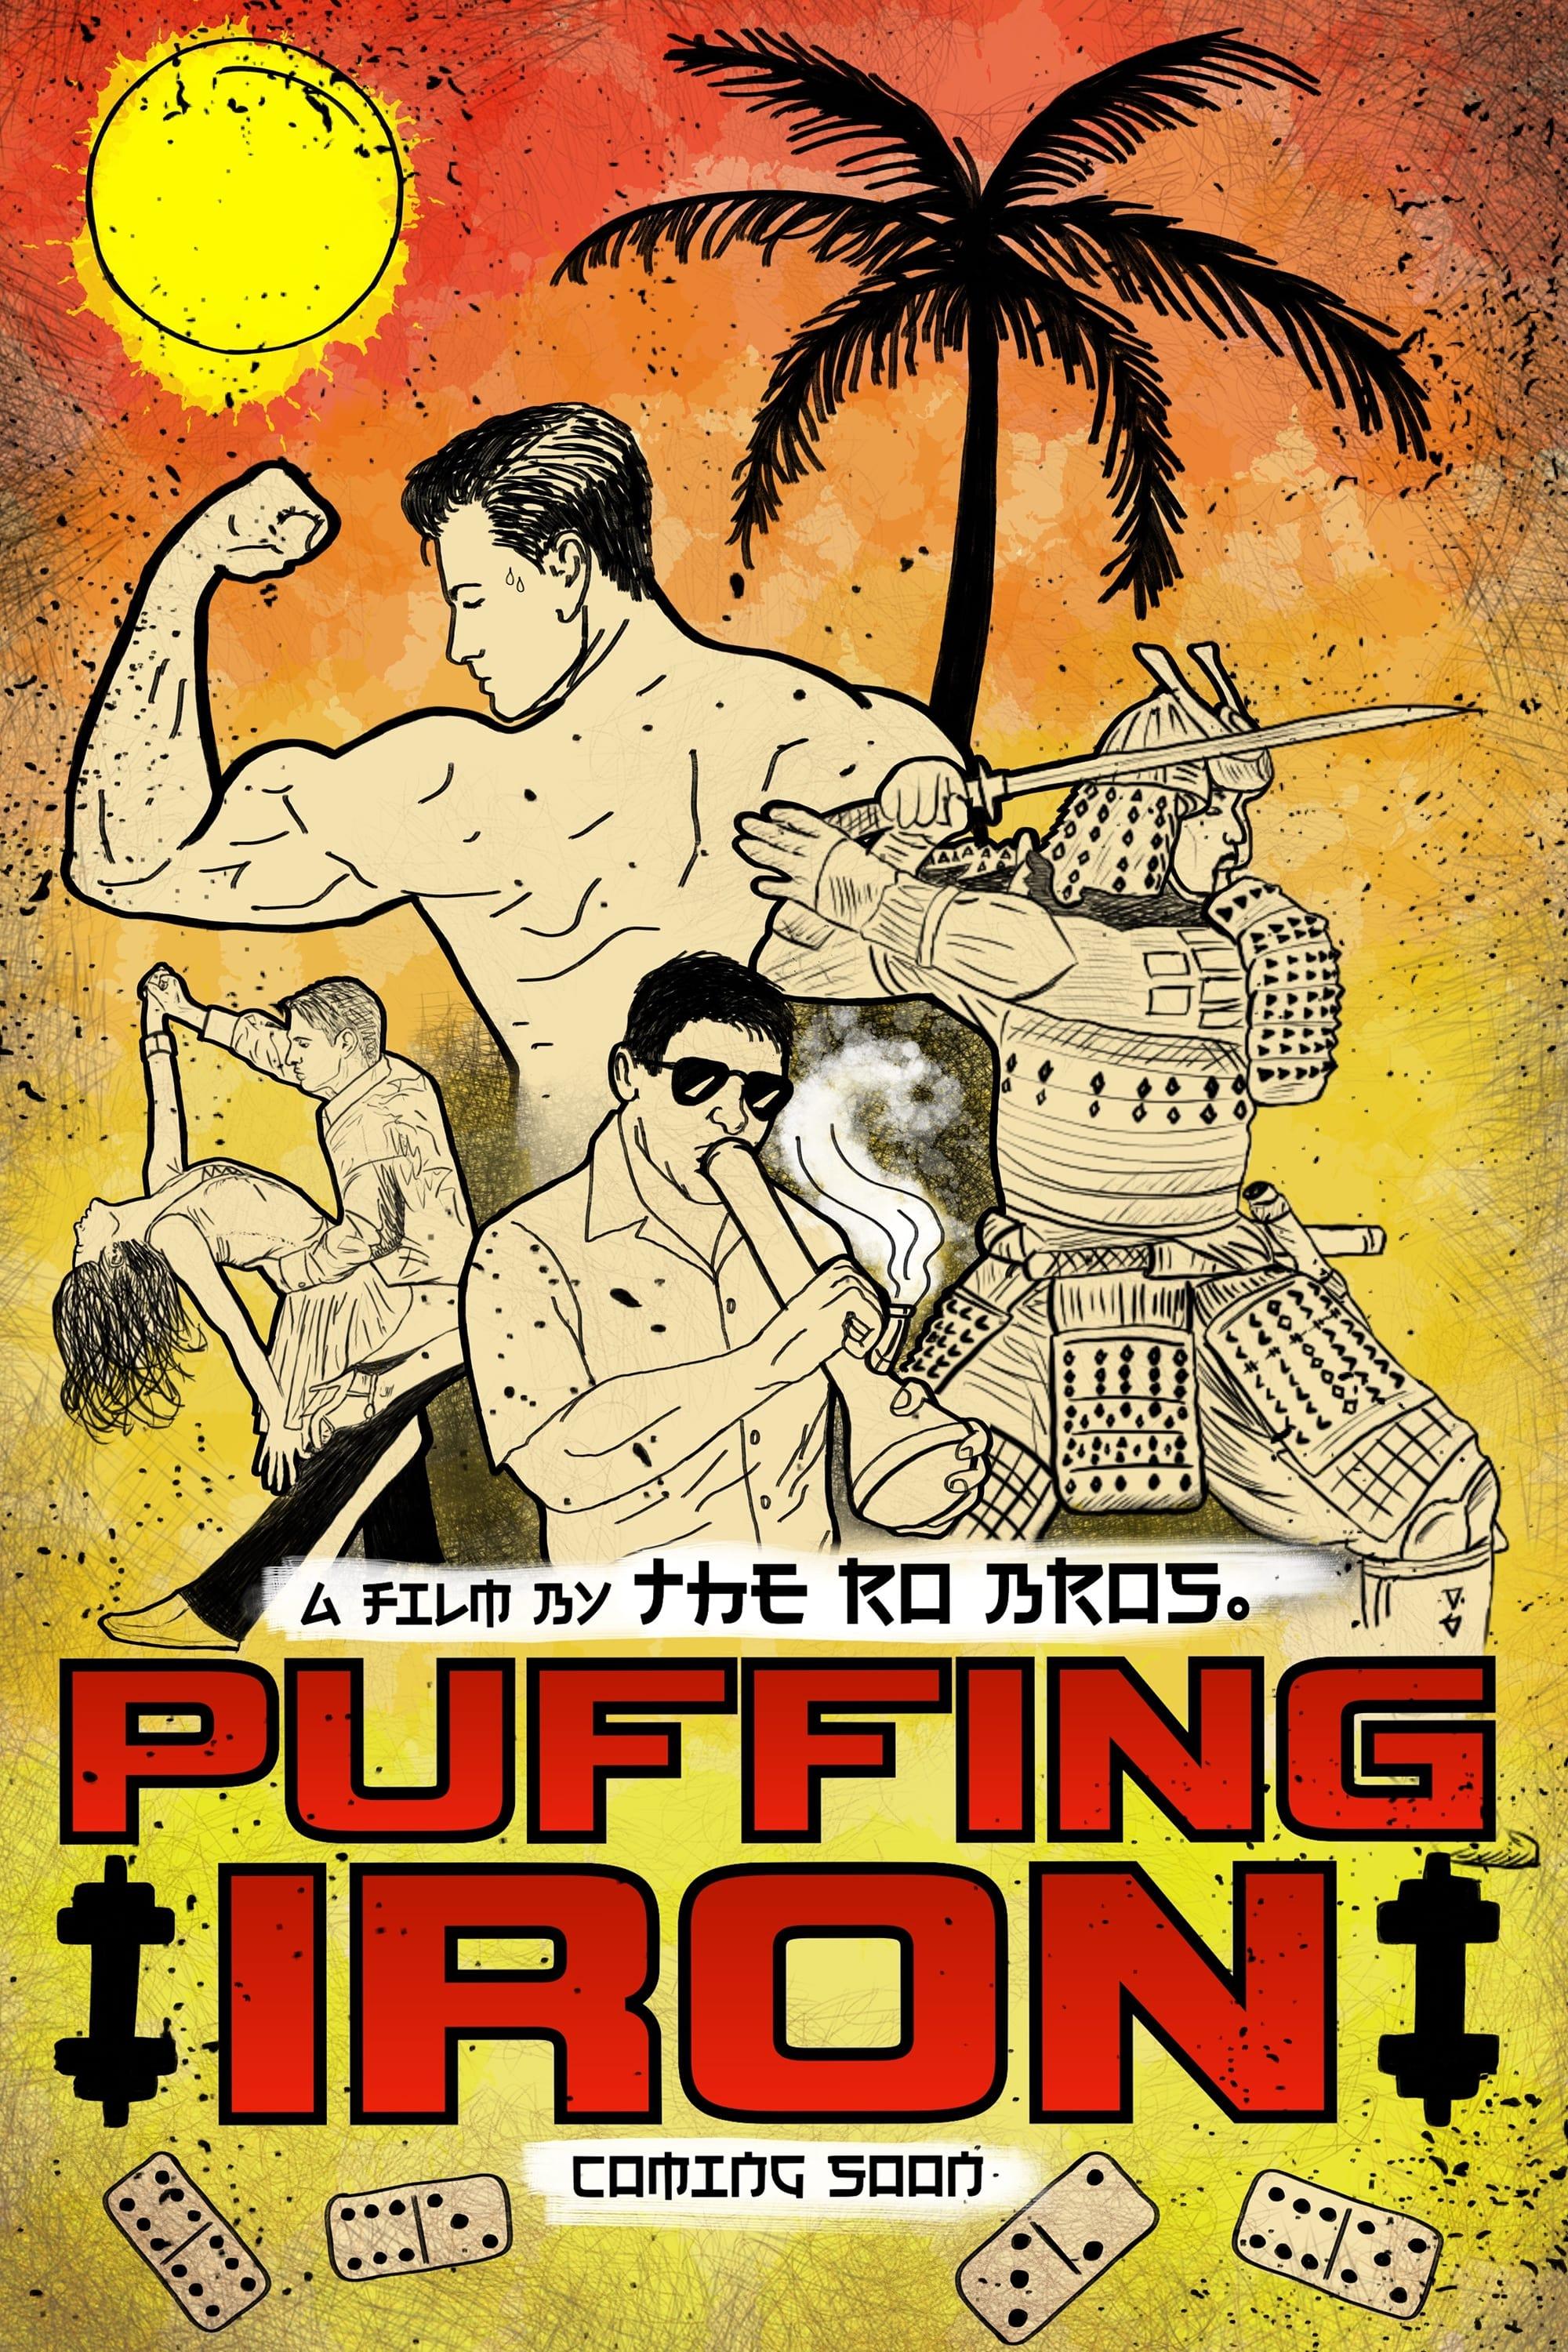 Puffing Iron poster